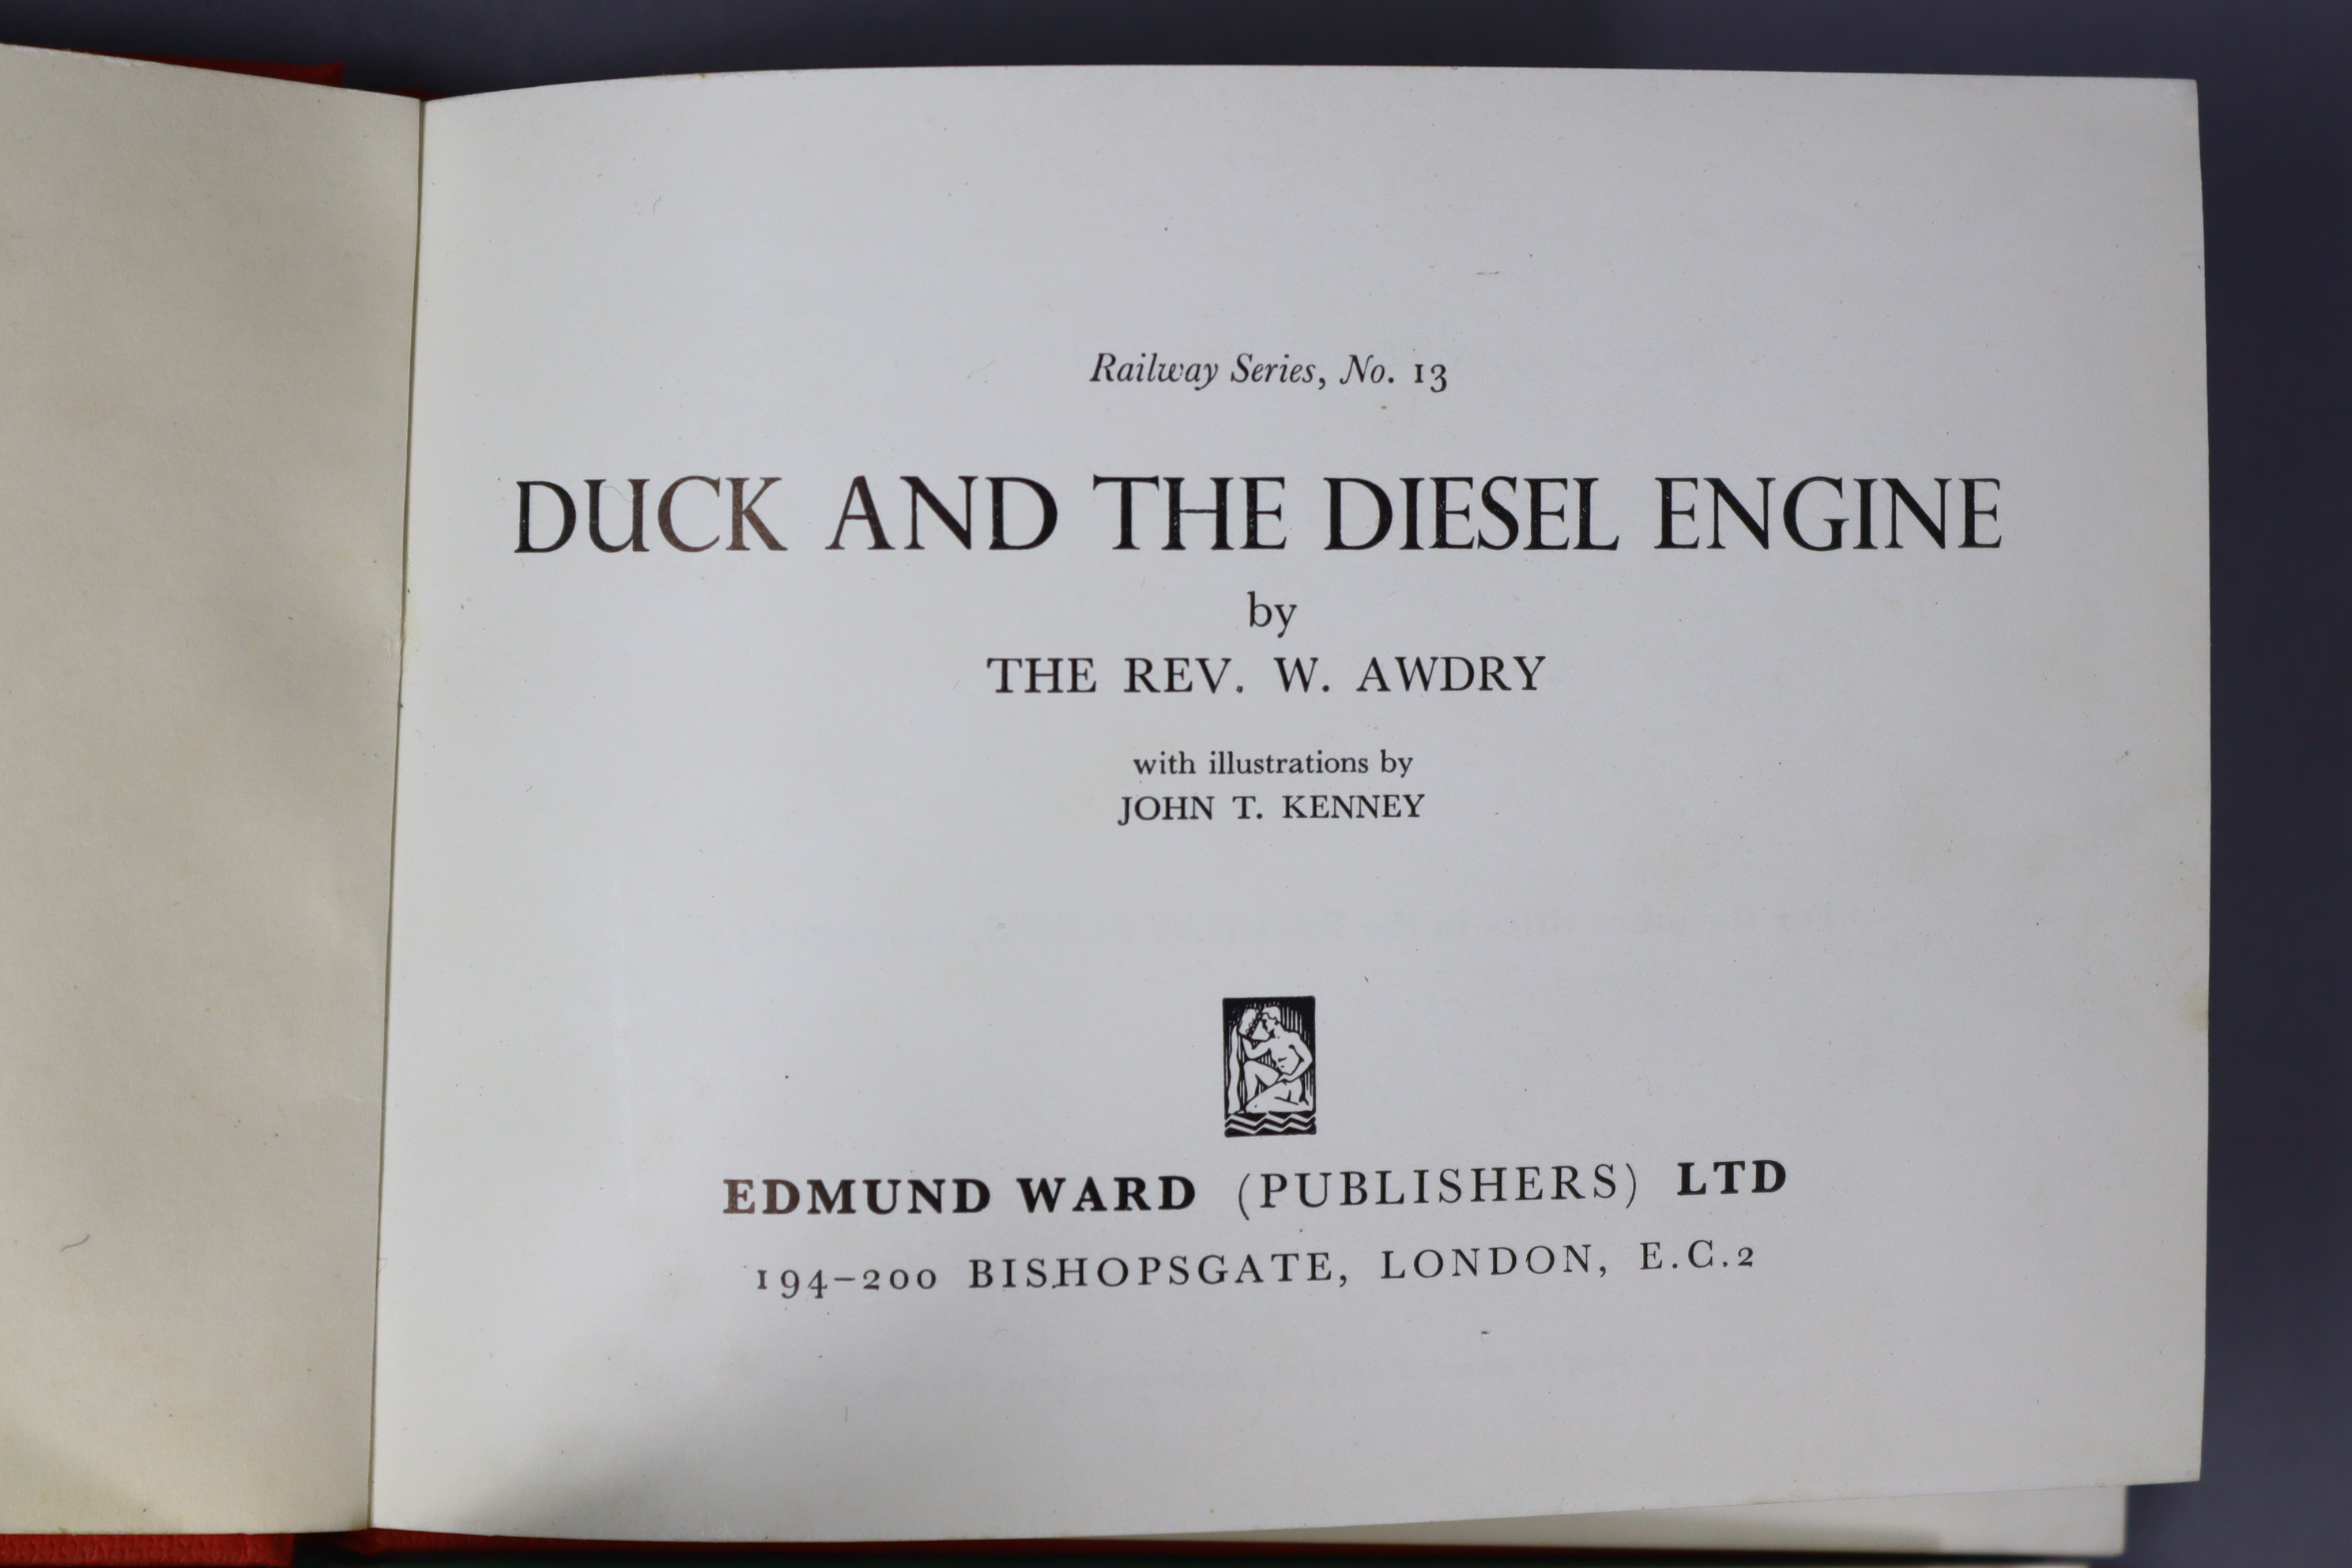 Three Railway Series volumes by the Rev. W. Awdry titled: “Duck And The Diesel Engine”, “Gordon - Image 3 of 5